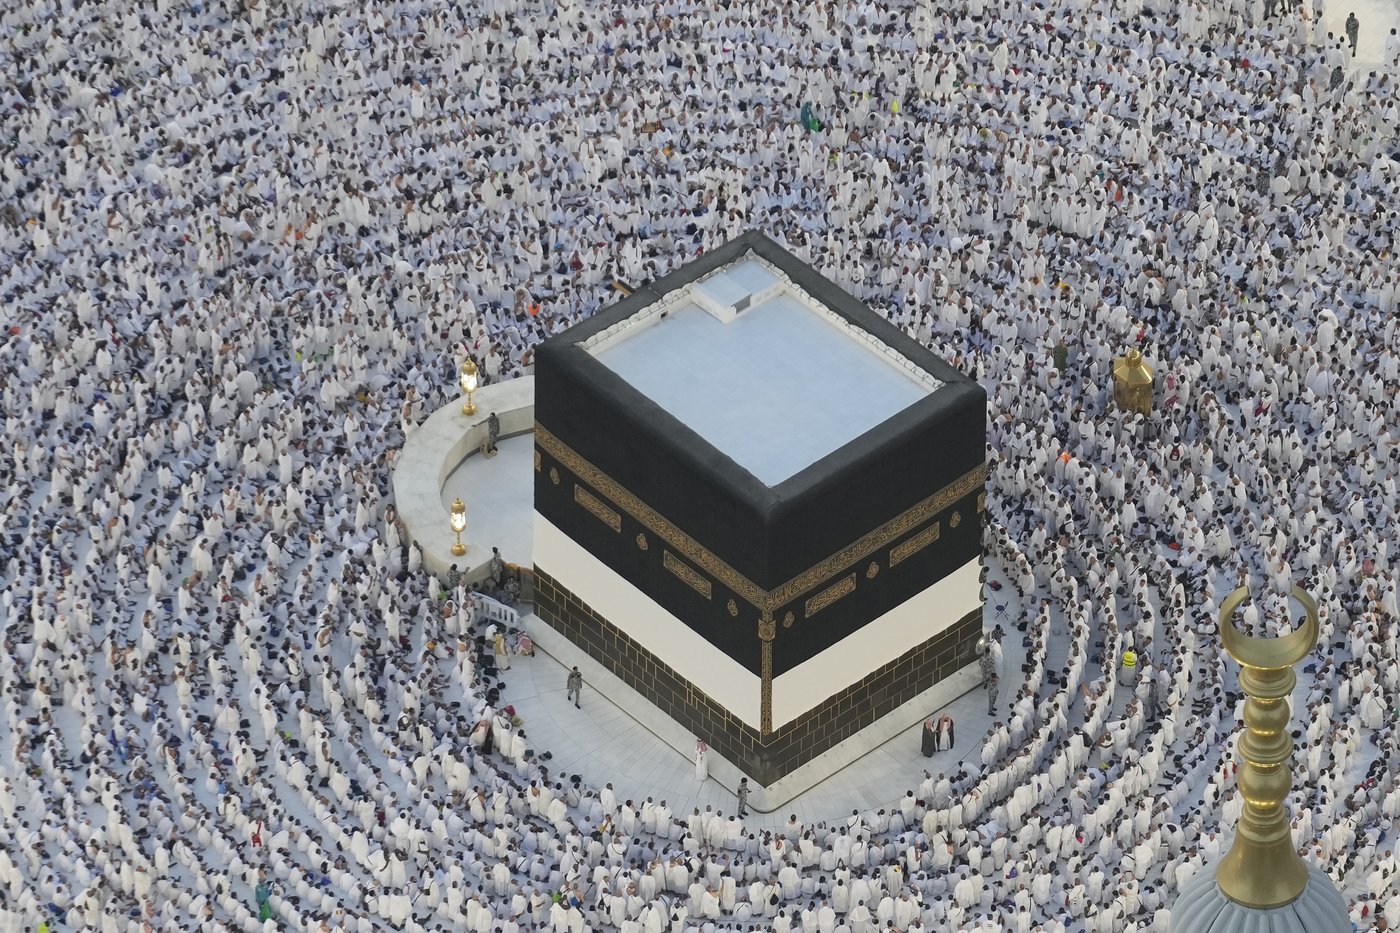 More than 1.5 million foreign Muslims arrive in Mecca for annual Hajj